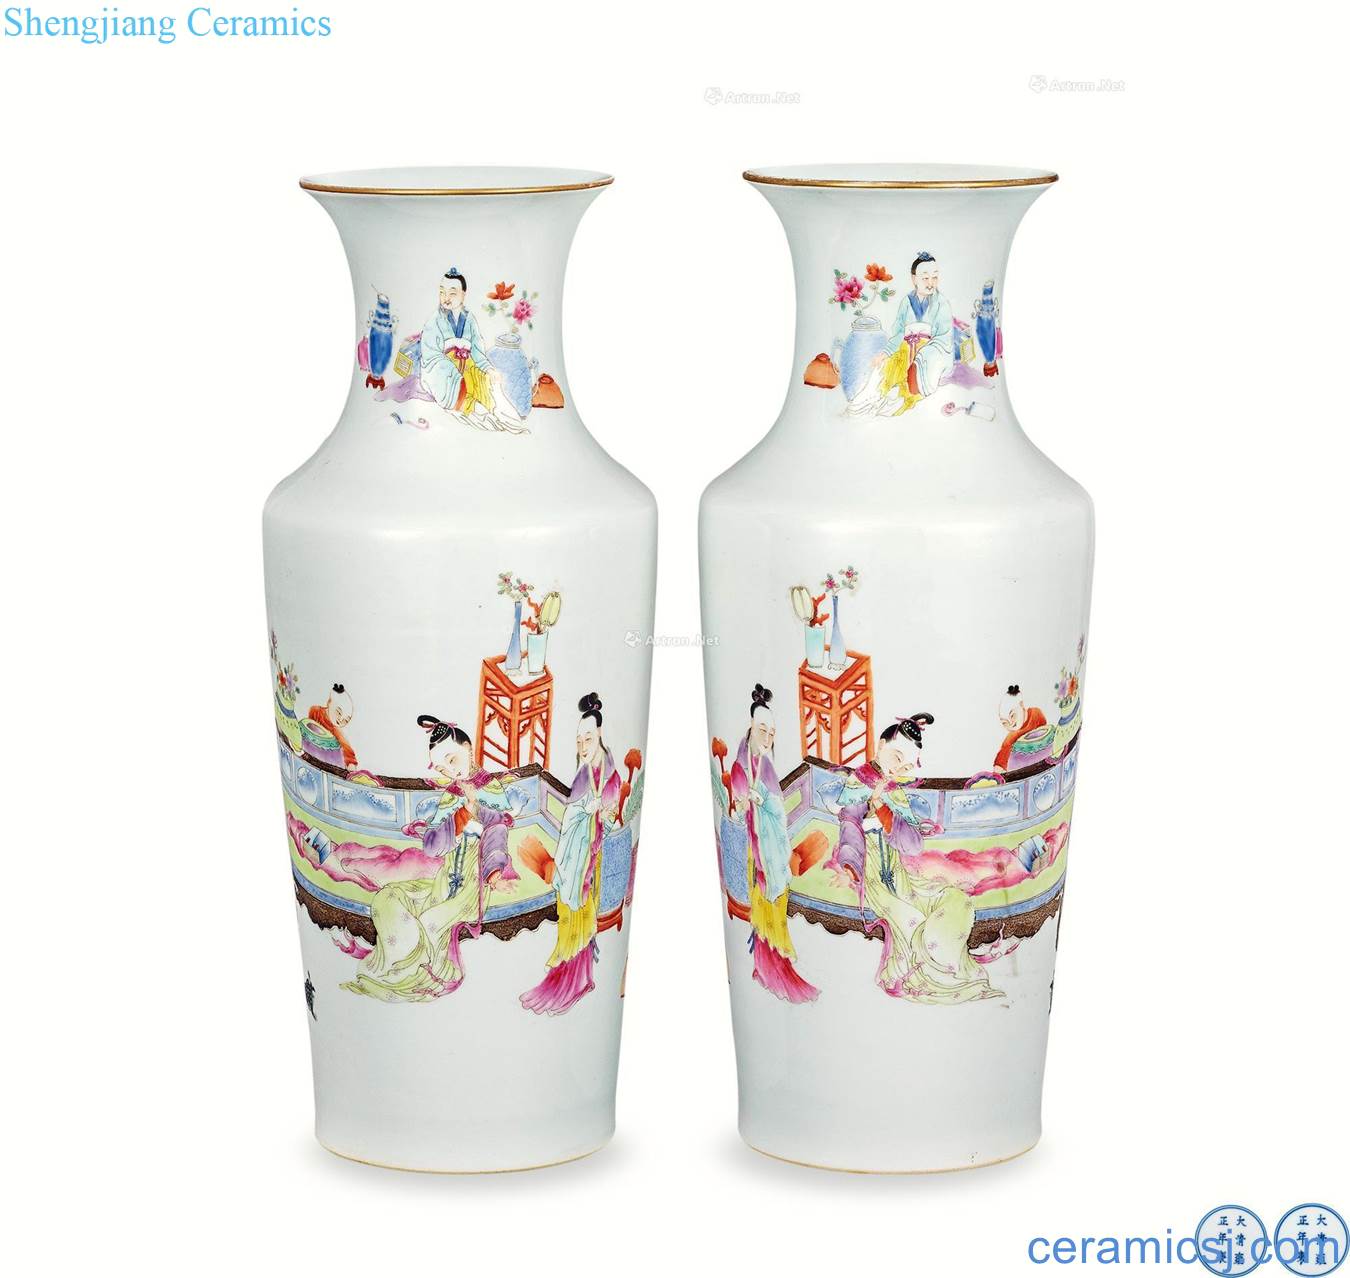 Qing dynasty pastel mother and baby bottles (a)